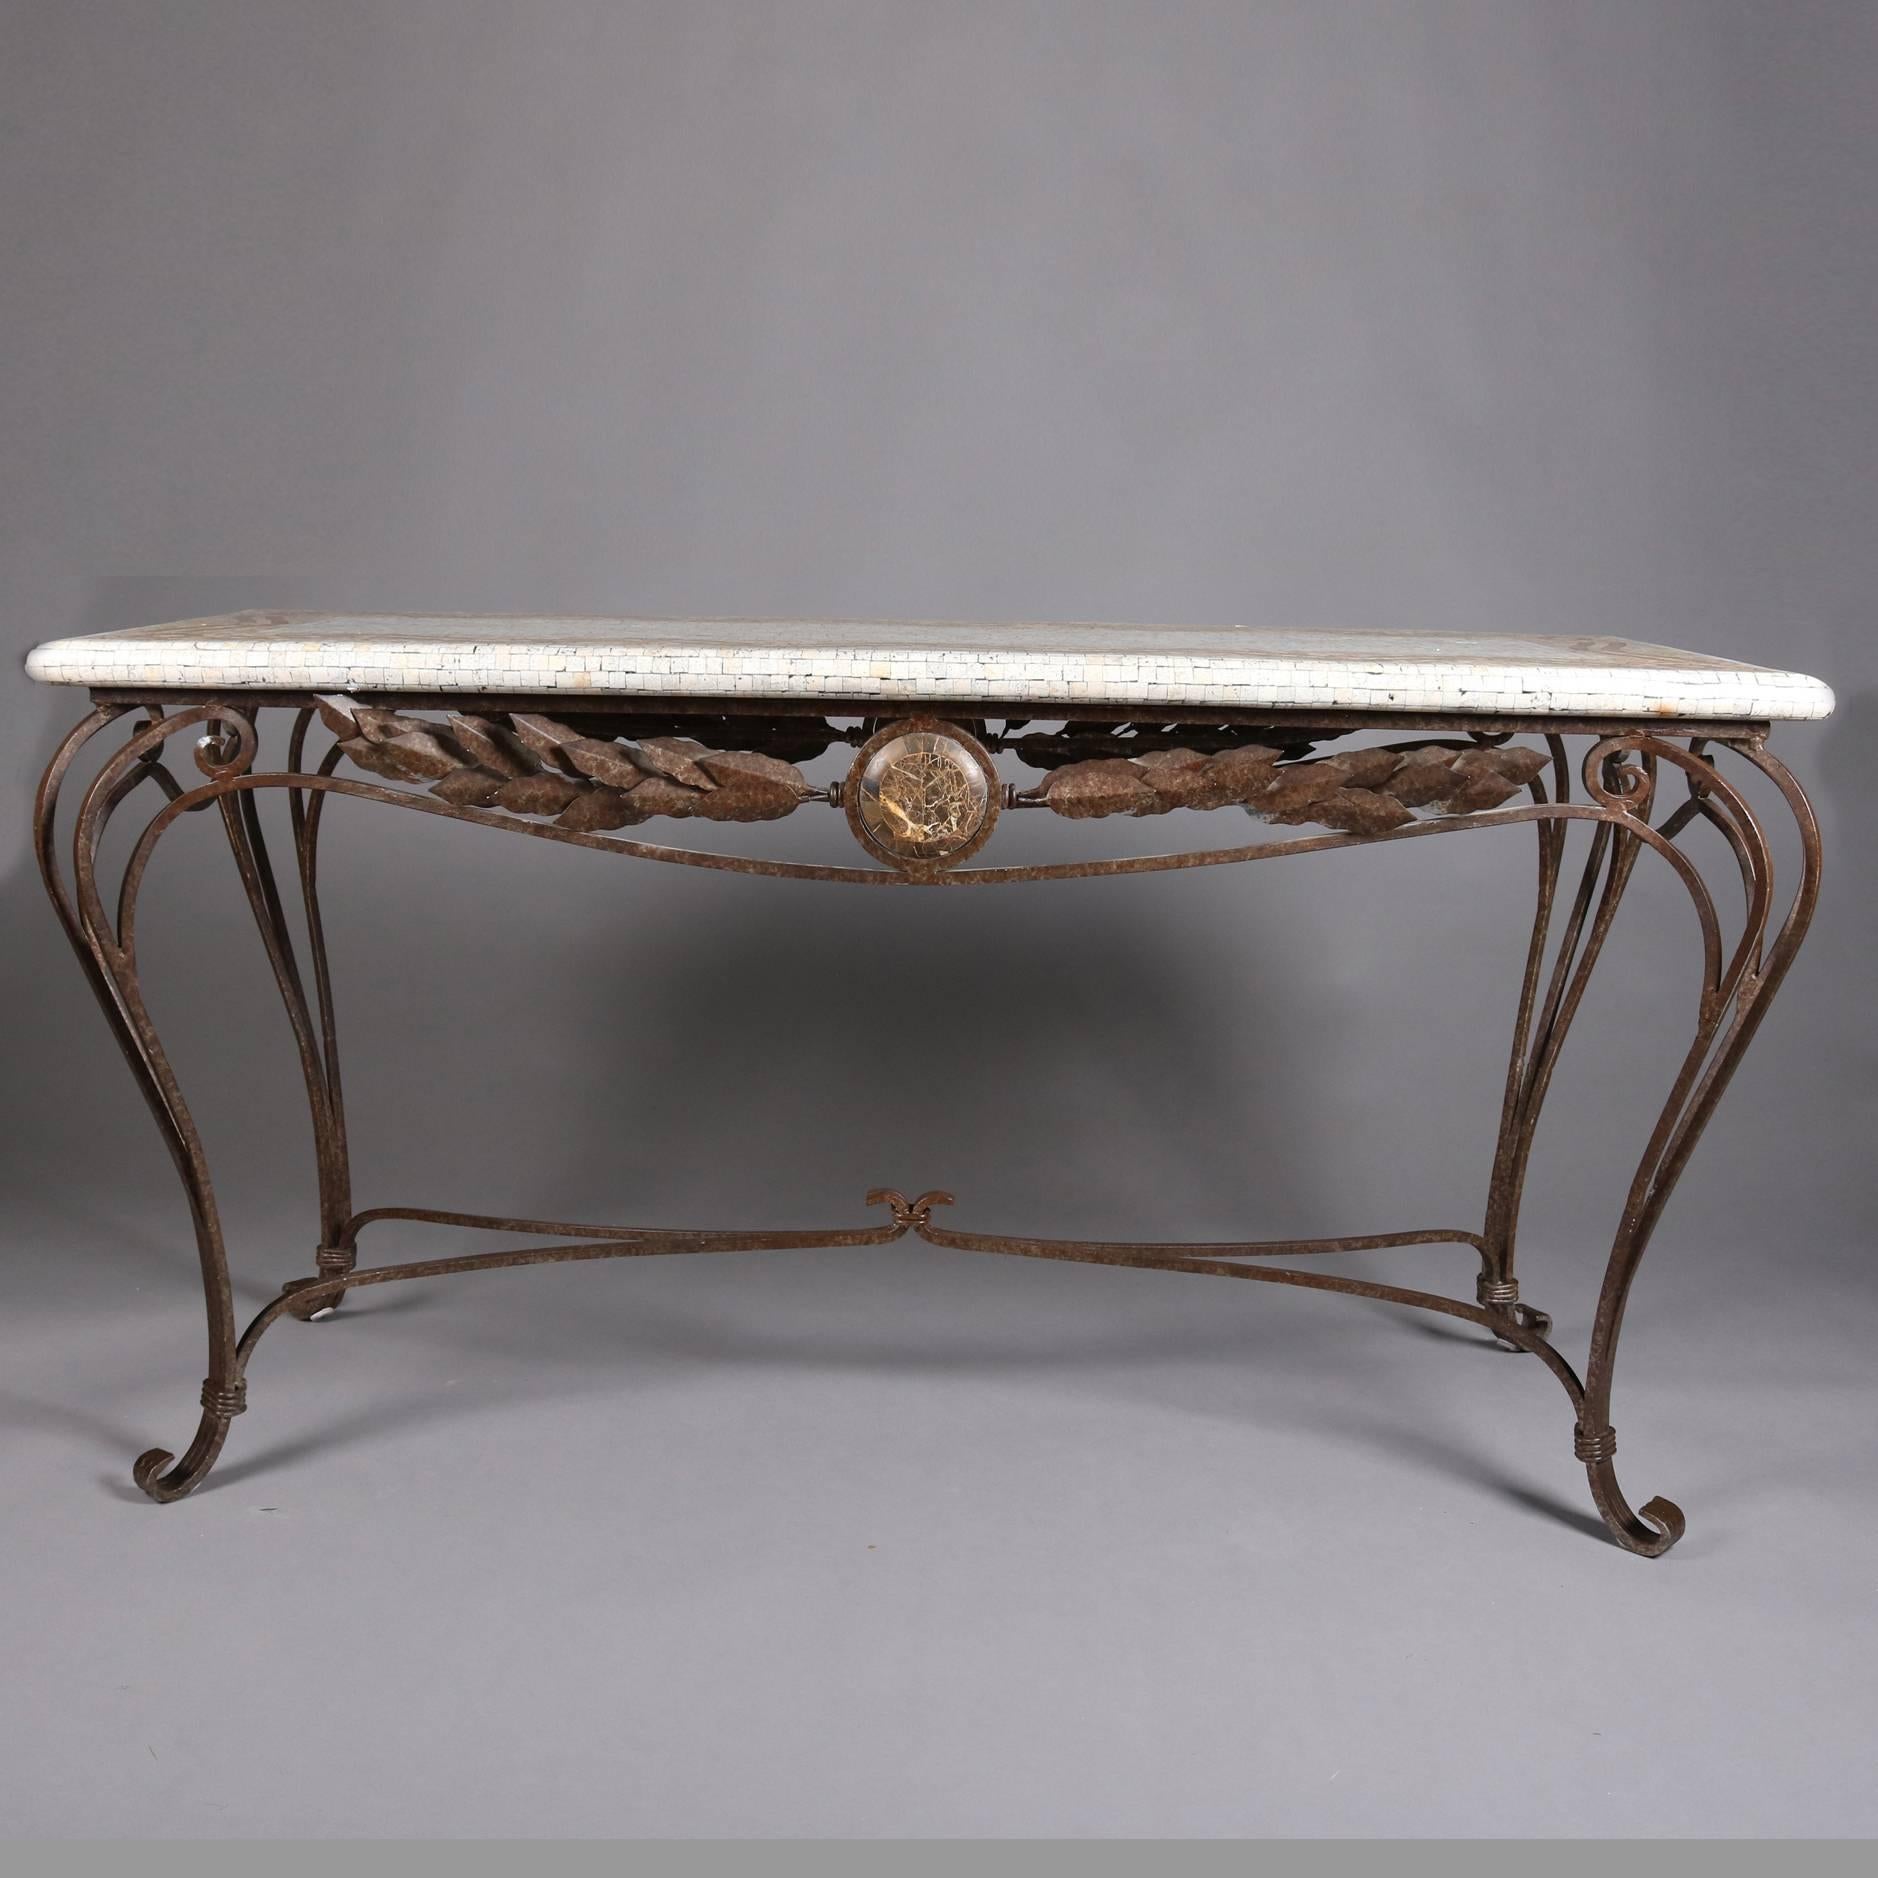 Italian hall table features tile mosaic on composite plaster top above wrought iron base with scroll cabriole legs, apron with central medallion flanked by stylized leaves, 20th century

Measures: 30.5